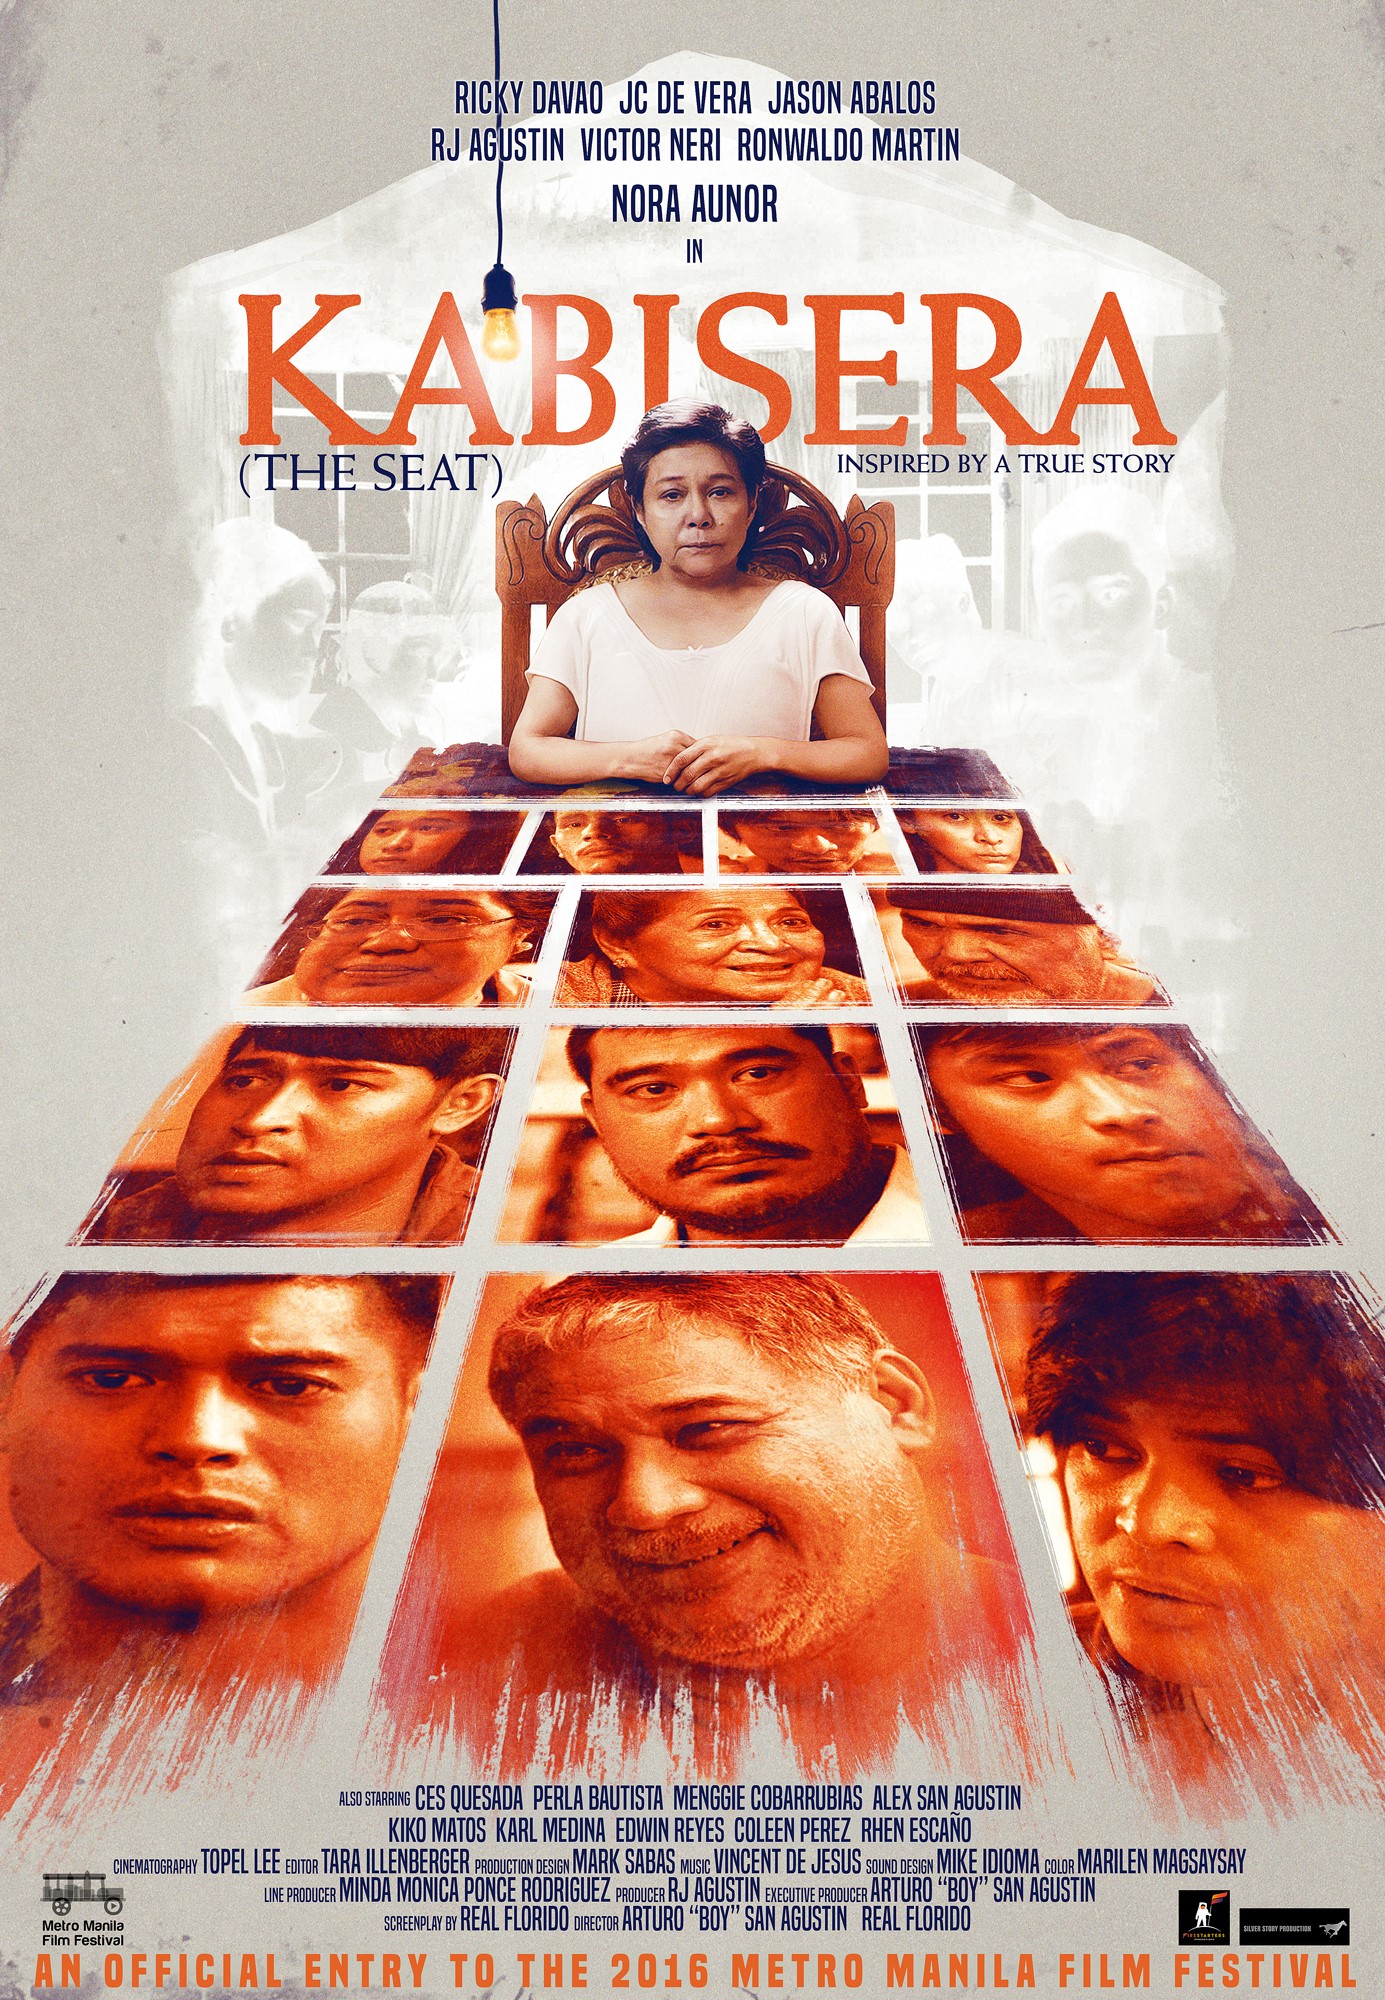 Kabisera Film - MMFF 2016 Page Liked · November 29 · Presenting the official movie poster of KABISERA, an official entry to the 2016 Metro Manila Film Festival (MMFF) Official a film by Arturo Boy San Agustin & Real Florido Starring Nora Aunor Ricky Davao... See More — with Jc Salamankero, Alex San Agustin, Ces M. Quesada, Francsico Perestrelo De Matos, Vincent A. DeJesus, Karl Medina, Coleen Perez, Nog Quilala and Jason Abalos.